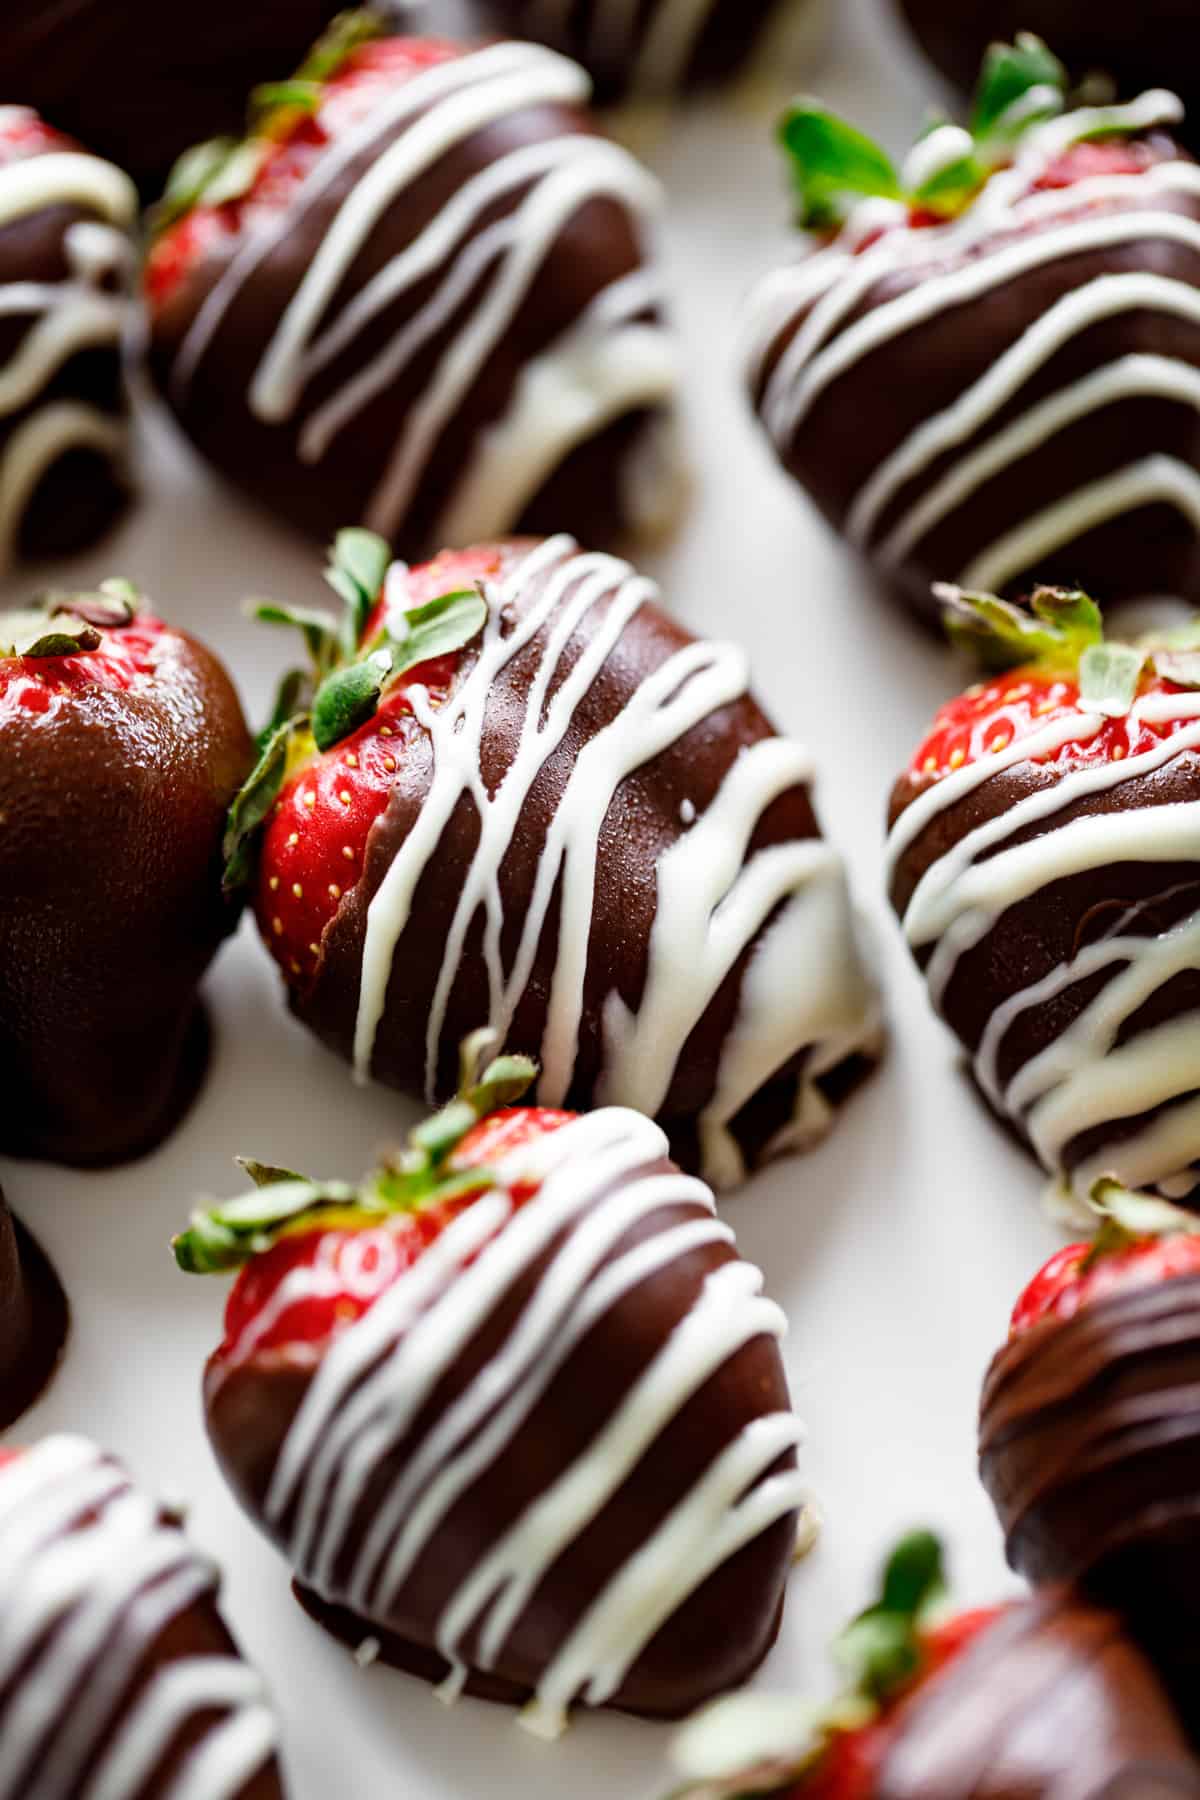 A close up photograph of a chocolate covered strawberry.